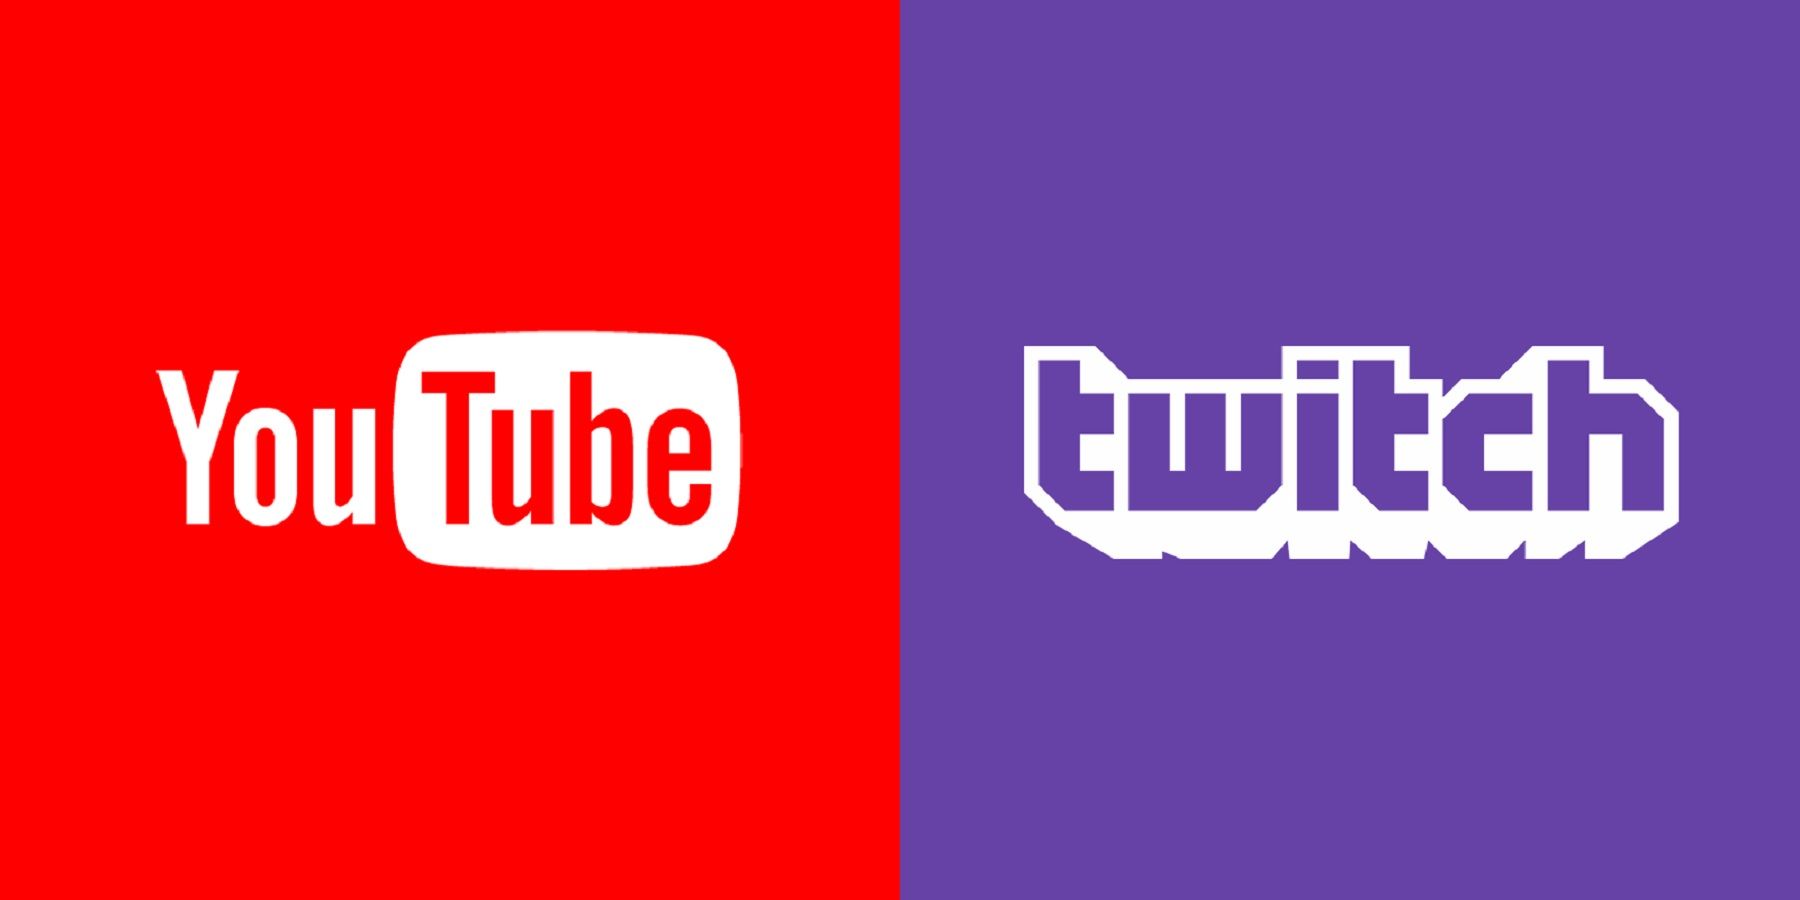 Image showing the YouTube logo on the left on a red background, and the Twitch logo on the right on a purple background.